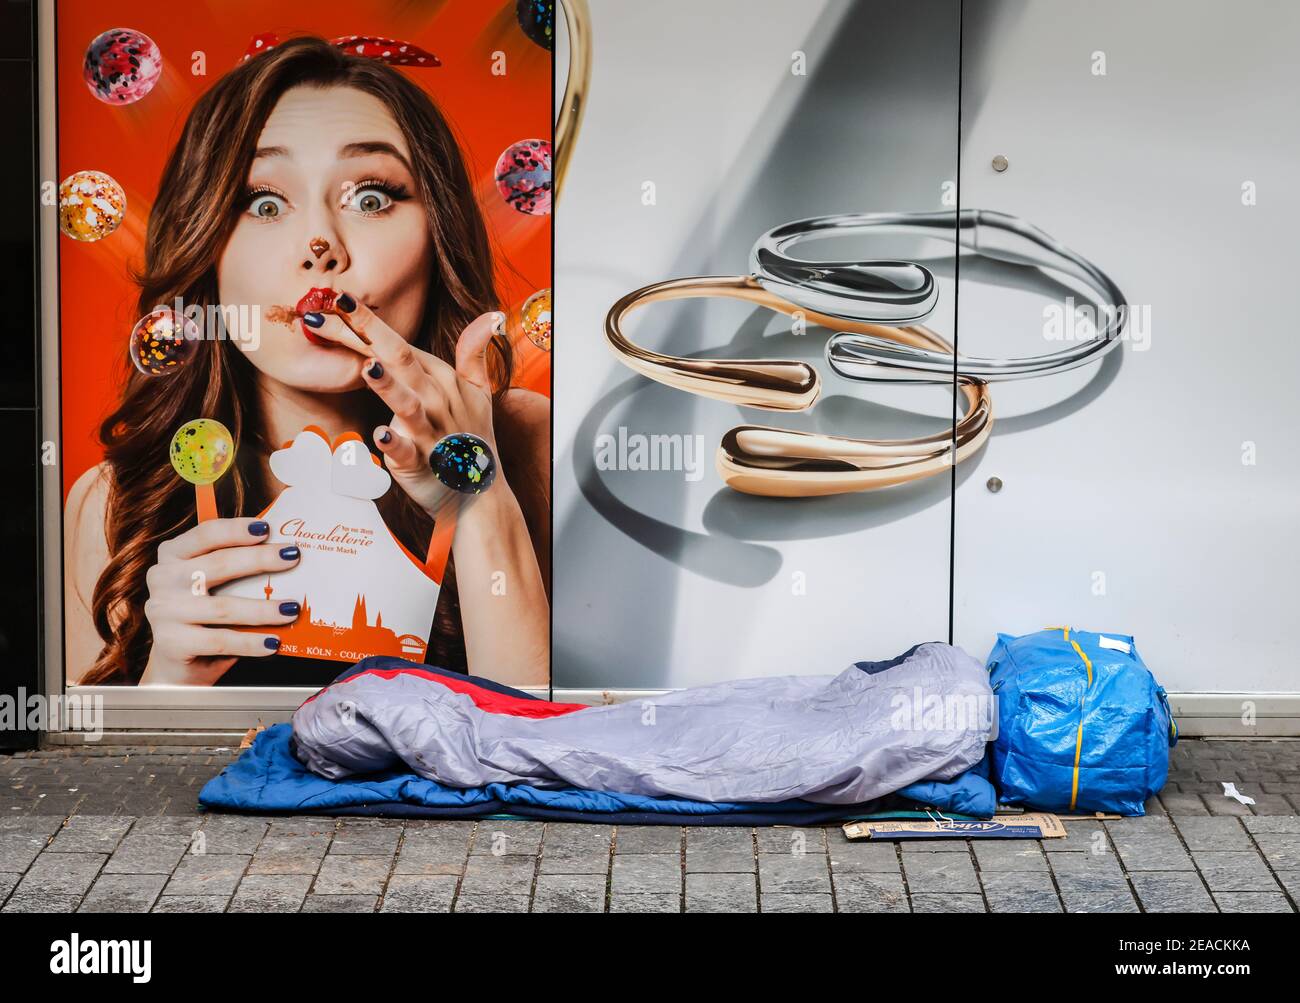 Cologne, North Rhine-Westphalia, Germany - Cologne city center in times of the corona crisis during the second lockdown, the shops are closed, a homeless person sleeps on the street. Stock Photo